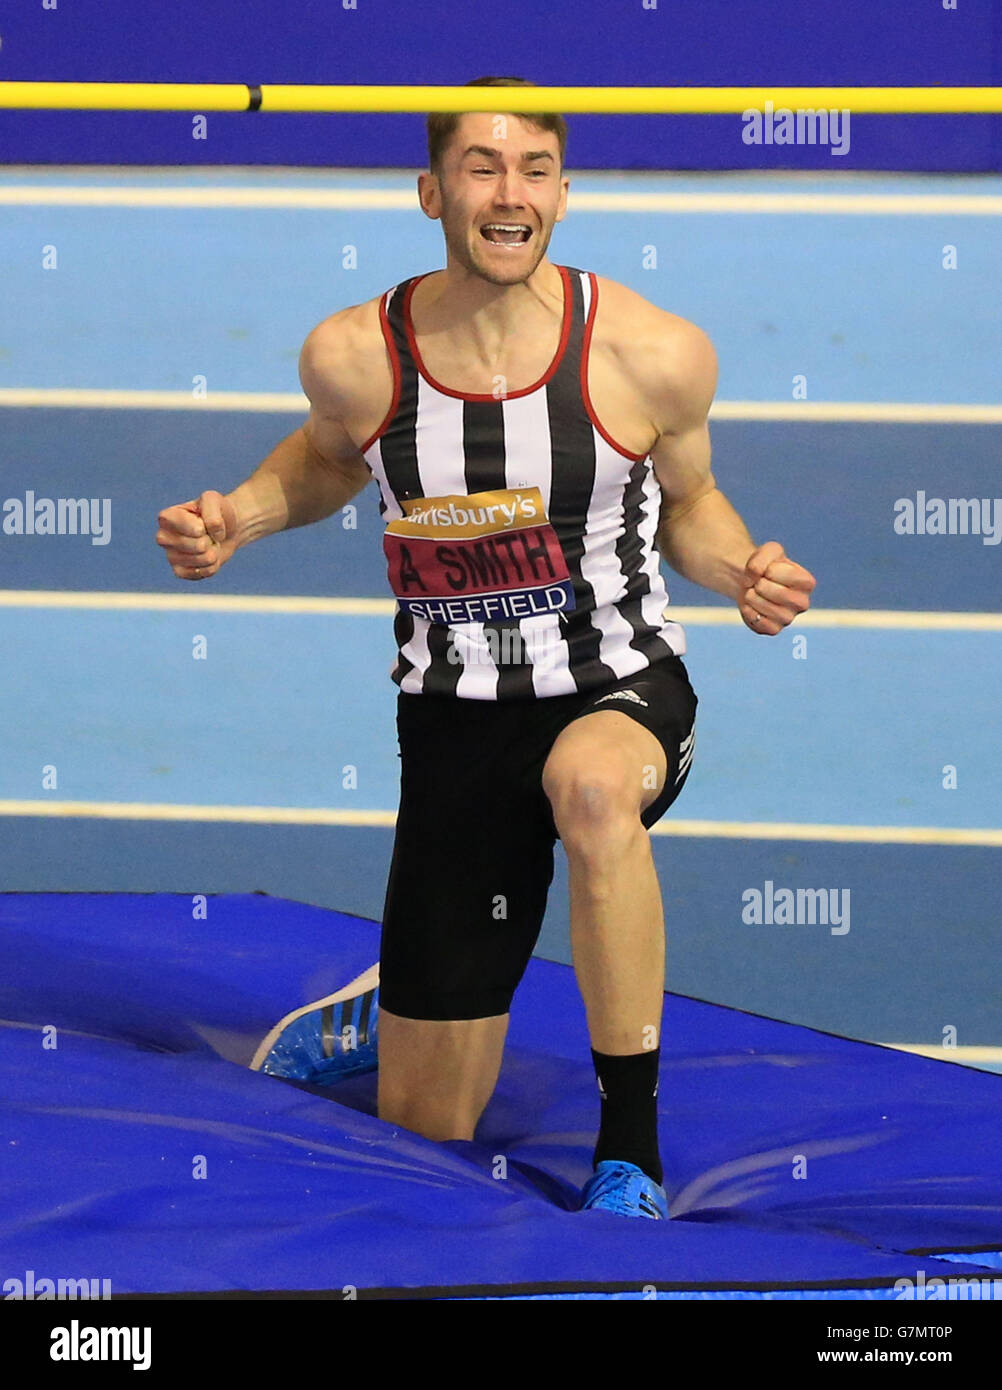 Allan Smith celebrates winning the mens high jump final during day two of the Sainsbury's British Indoor Championships at the English Institute of Sport, Sheffield. Stock Photo